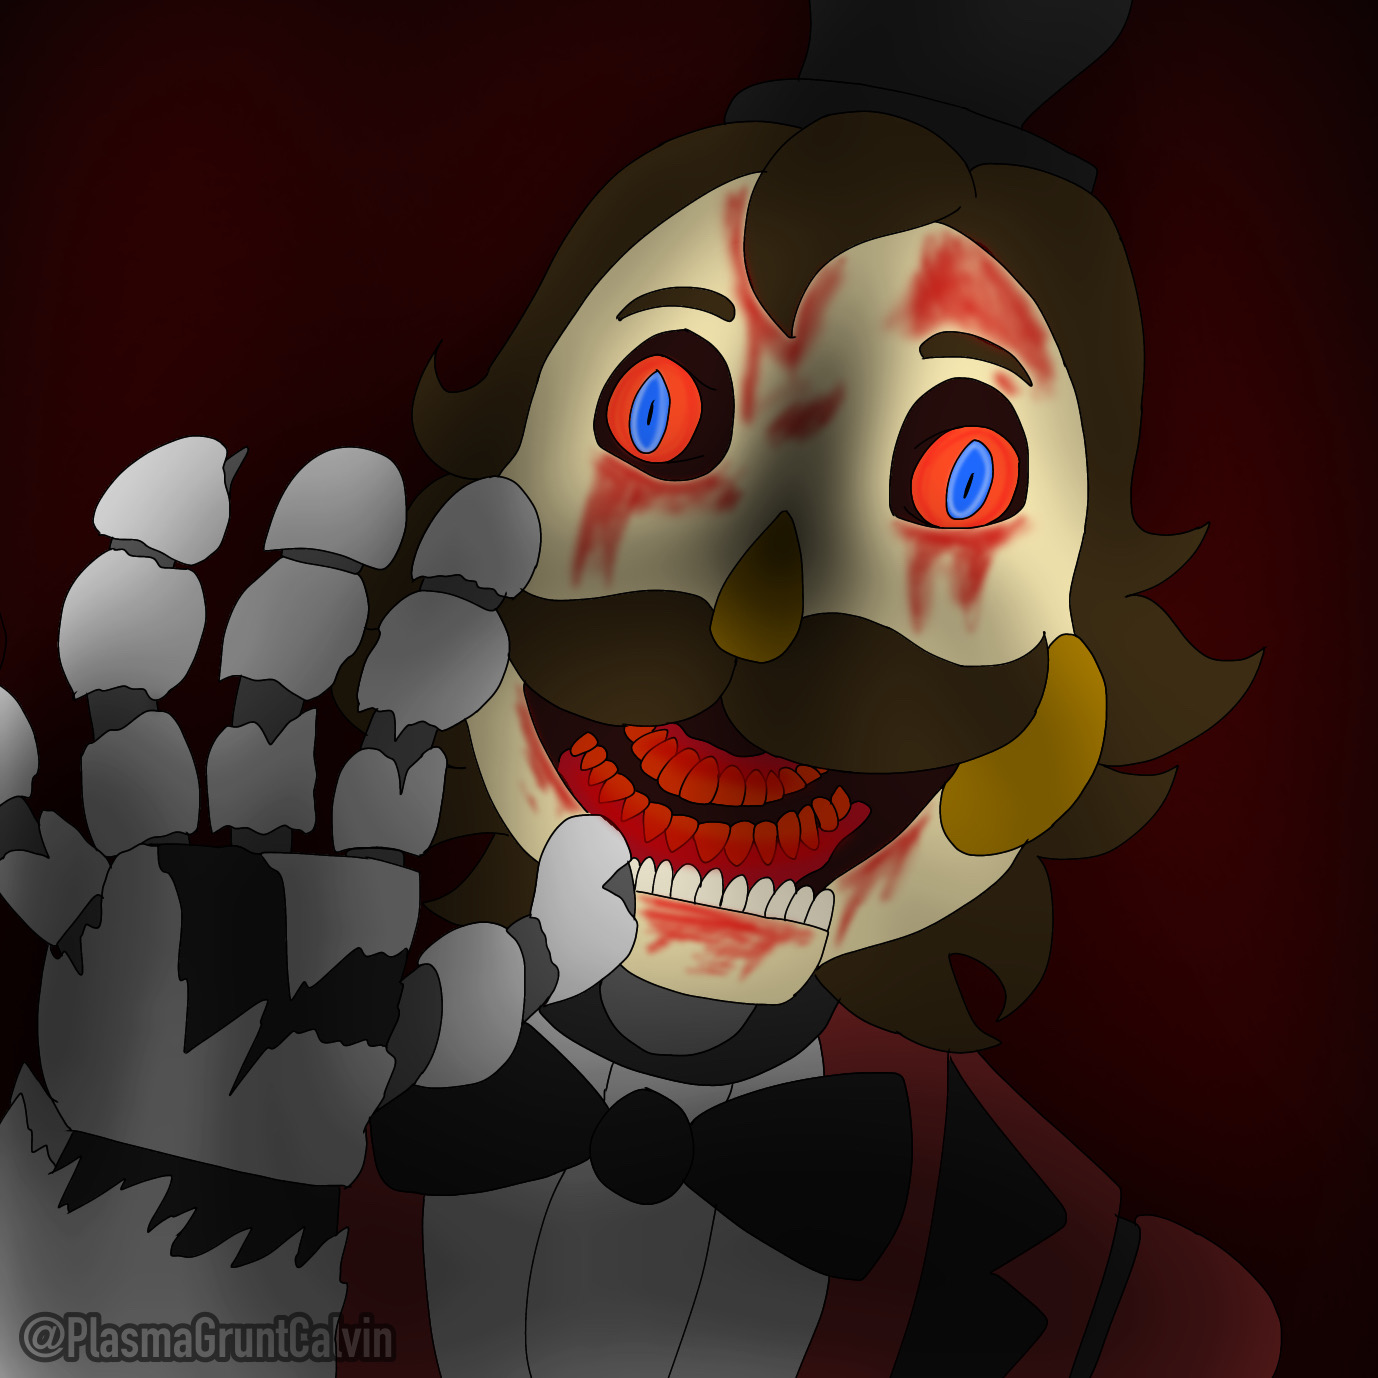 This was on the FNAF wiki by Pluagemask042 on DeviantArt